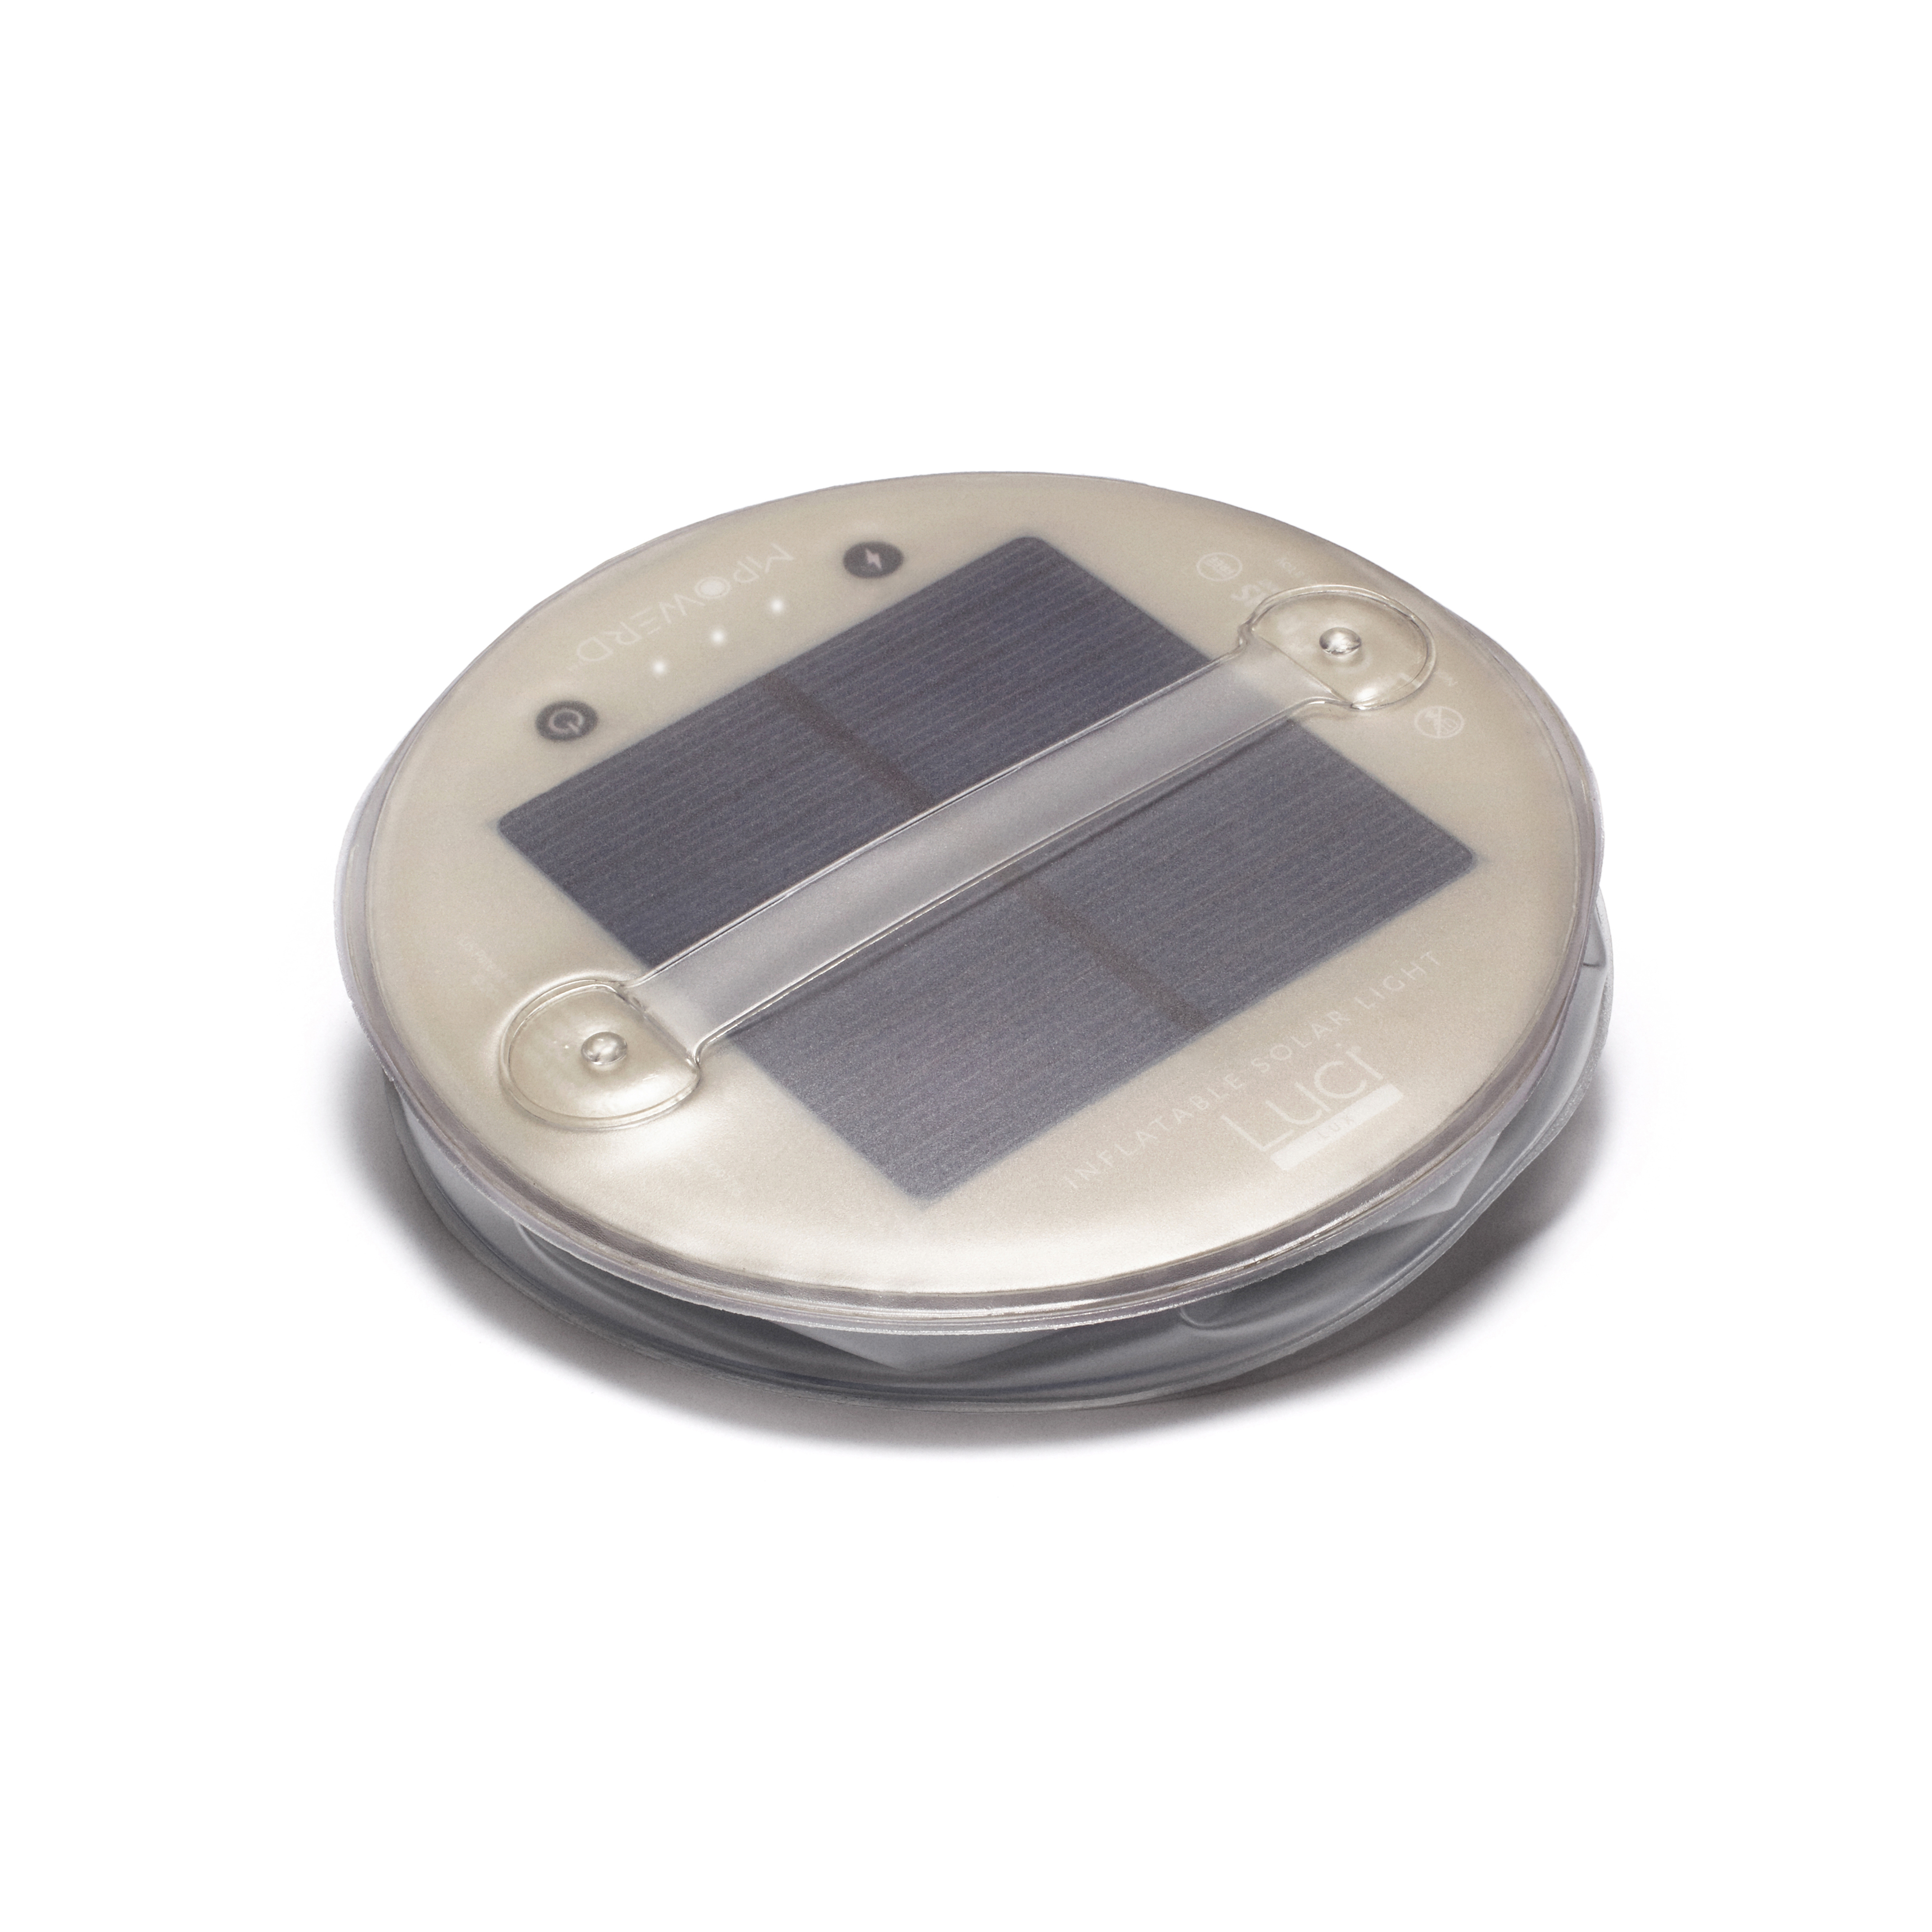 MPOWERED LUCI® LUX Solar LED Lampe